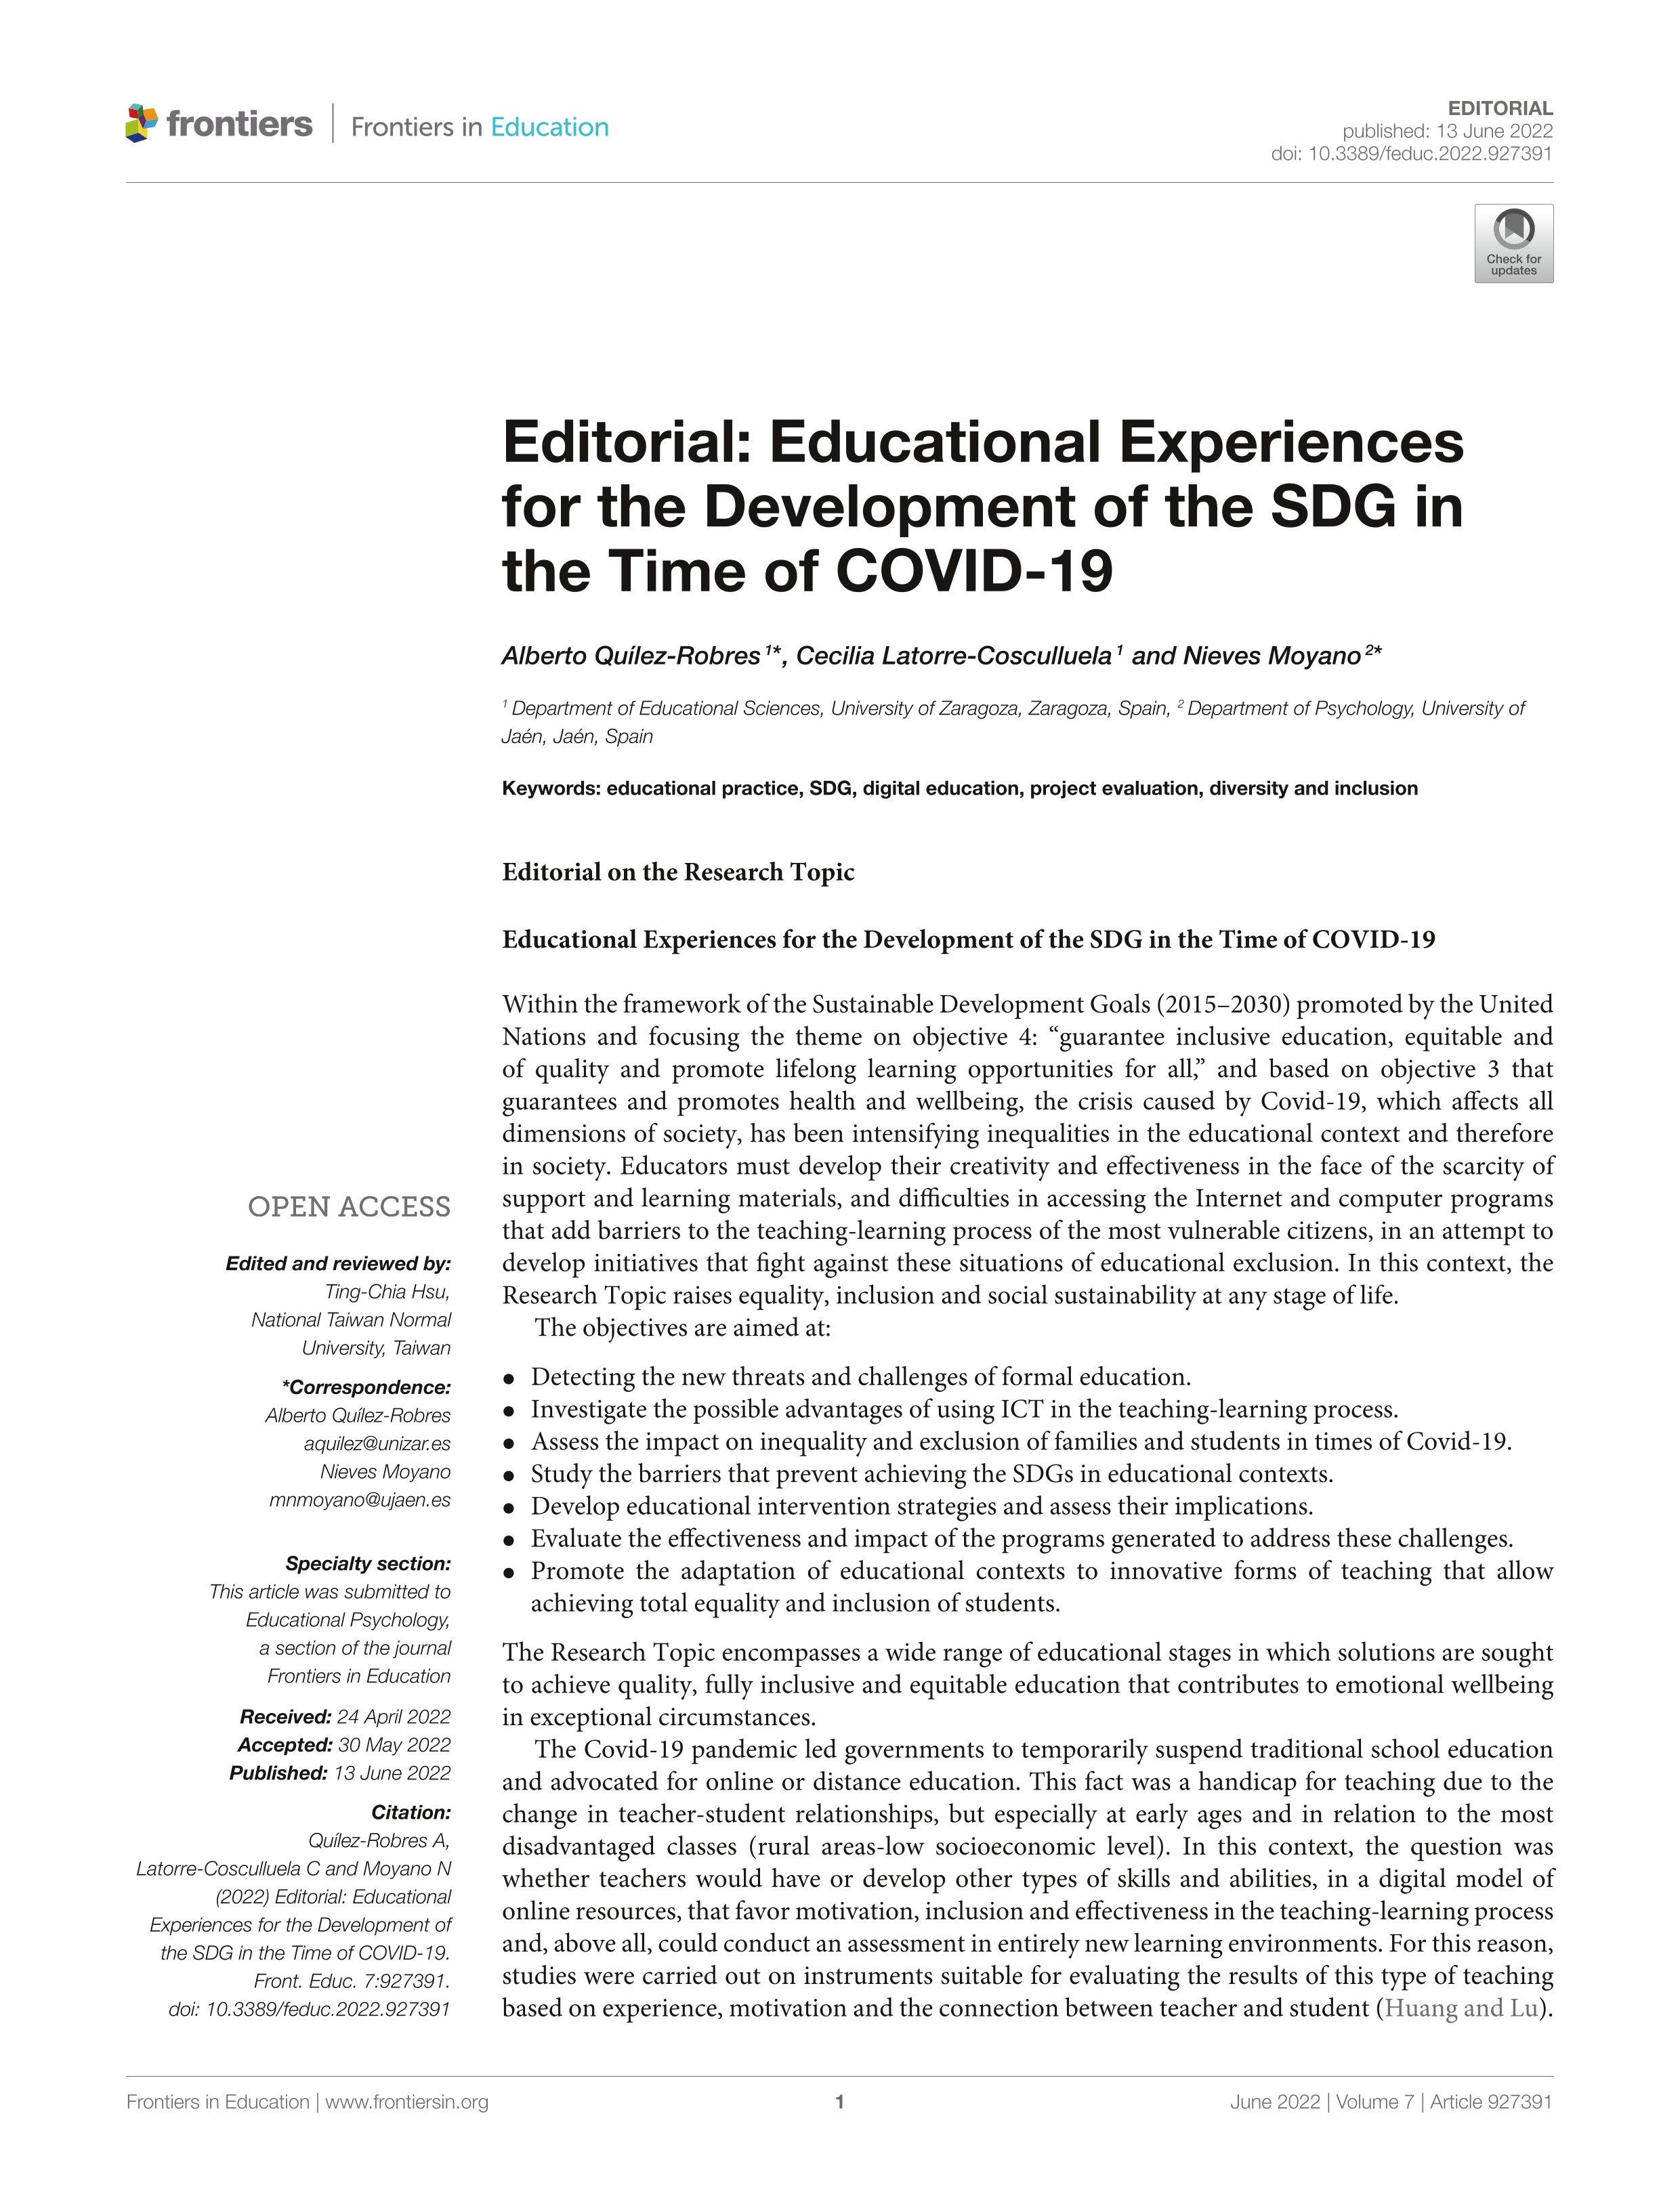 Editorial: Educational Experiences for the Development of the SDG in the Time of COVID-19